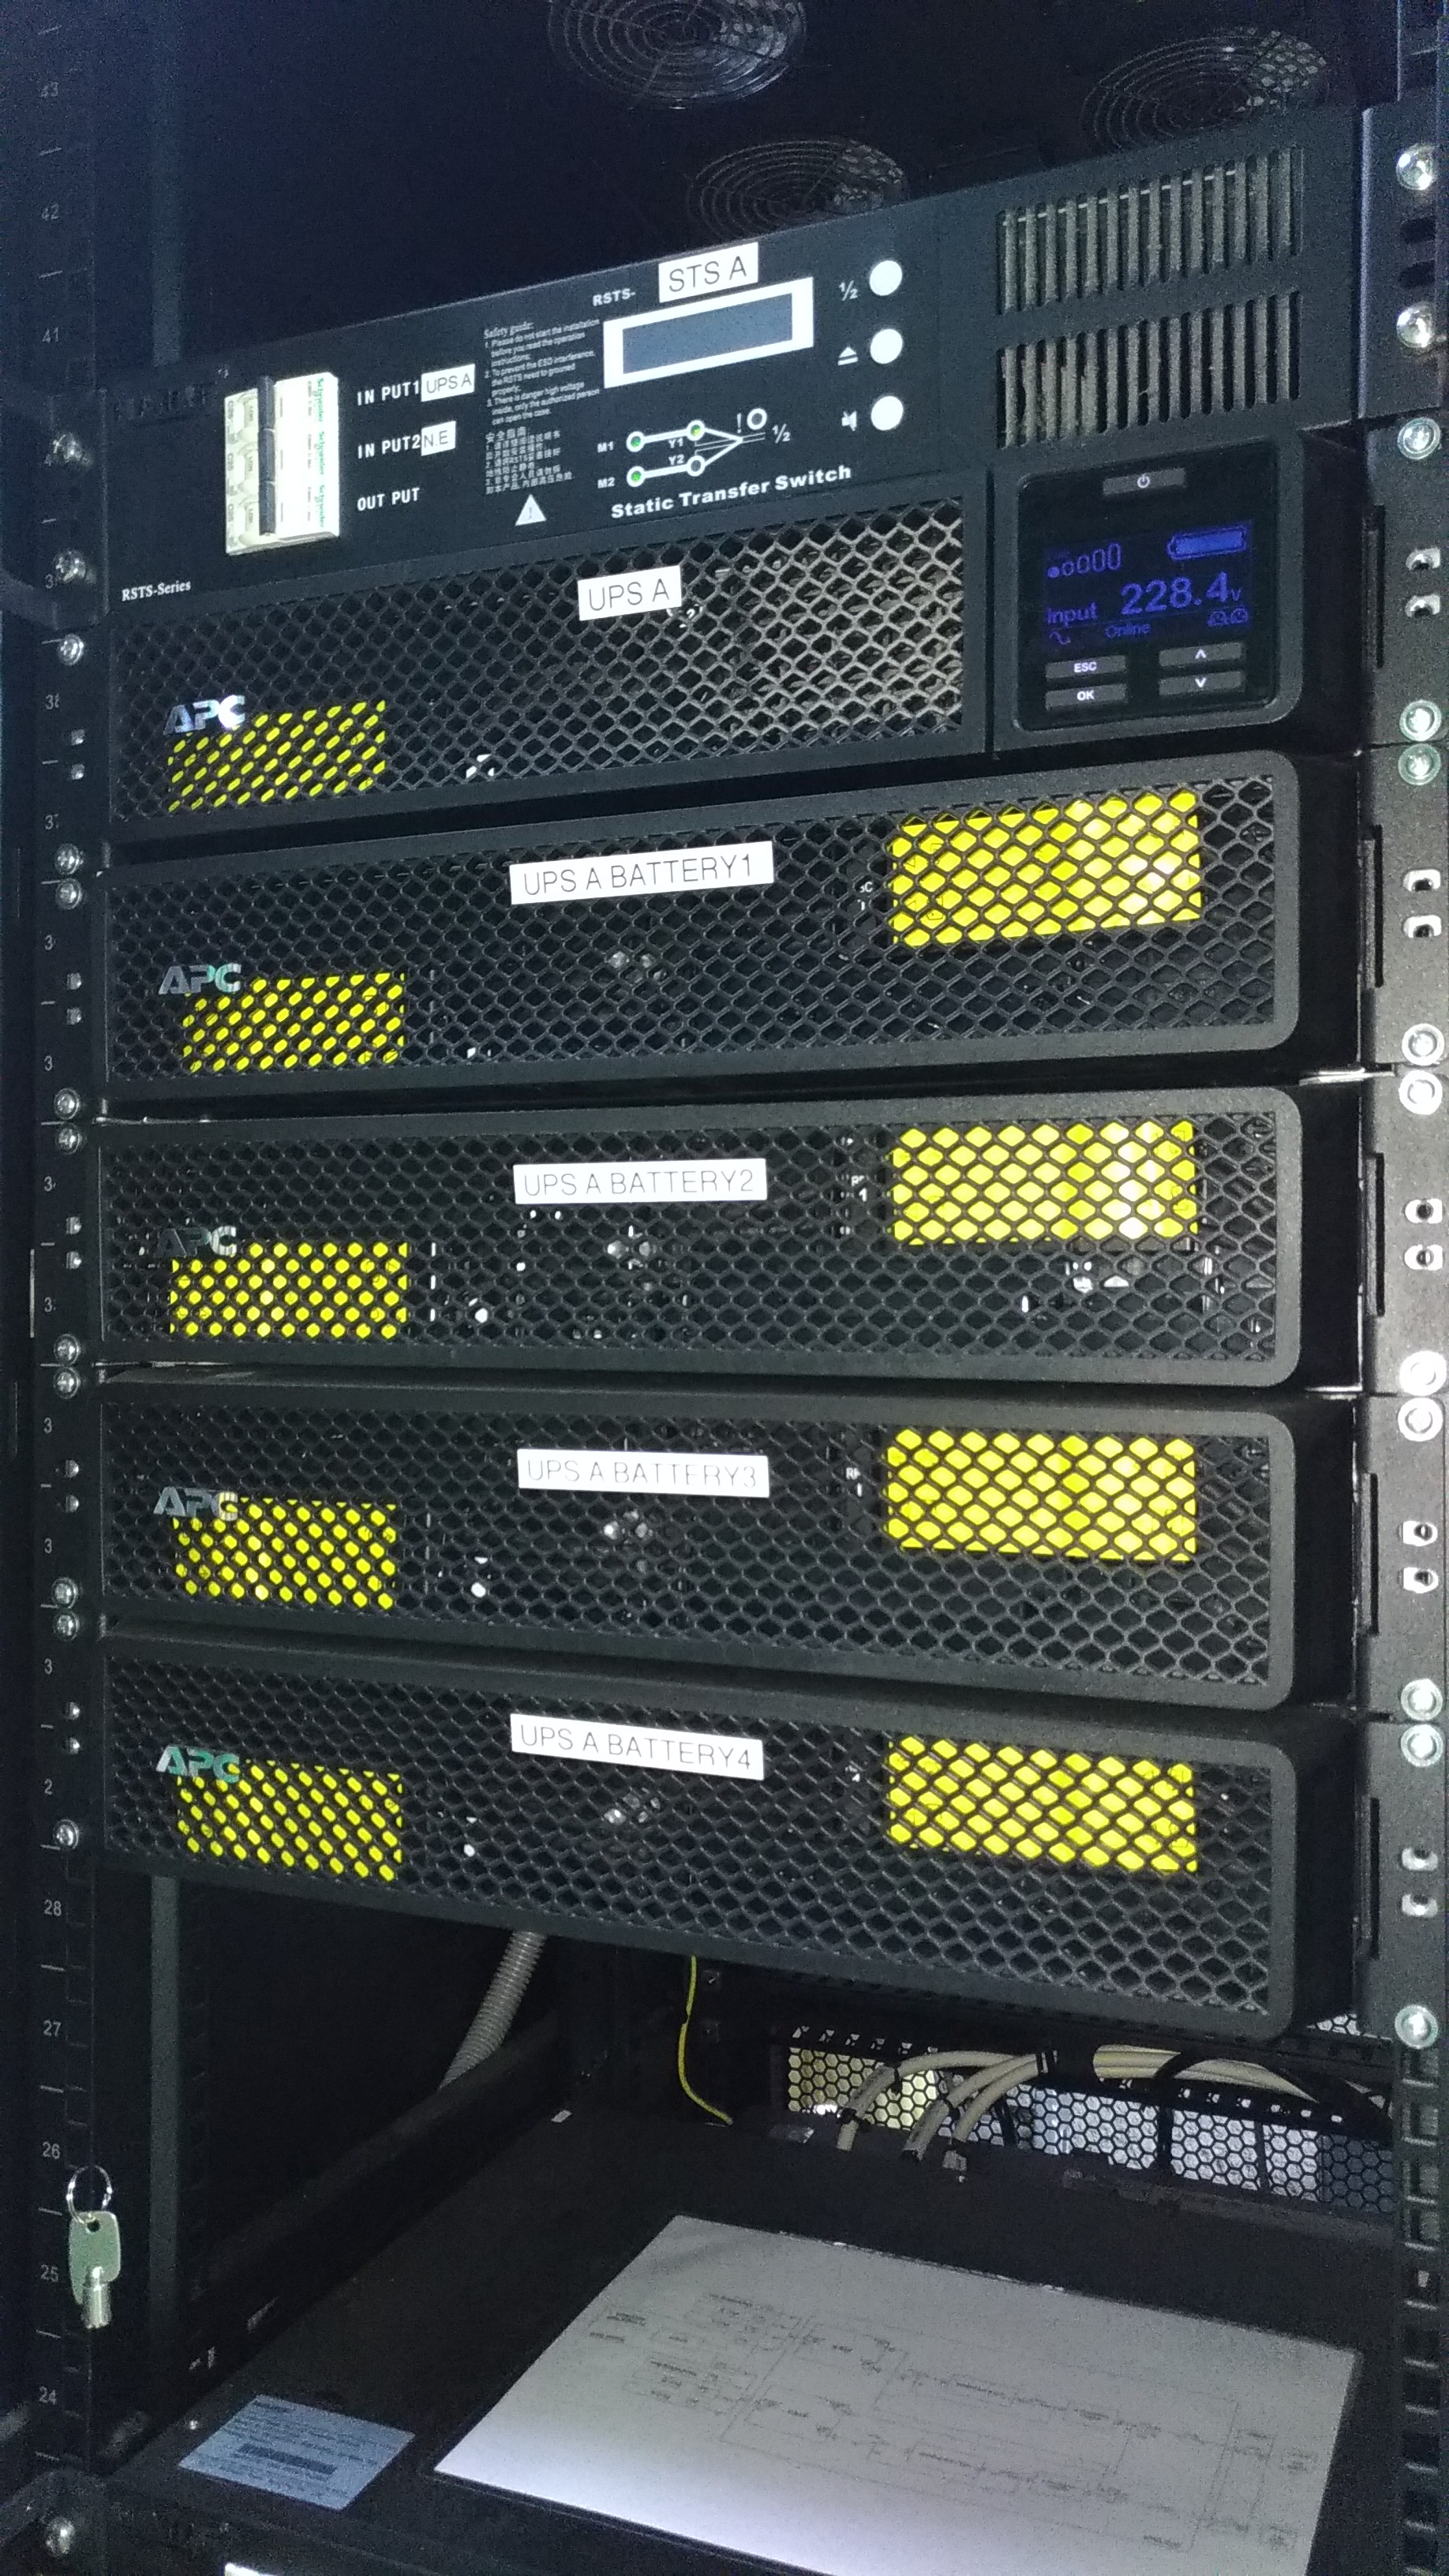 Close-up of a part of Installed Redundant UPS inside the new UPS Rack After Works in DSD Stanley STW (Typical)